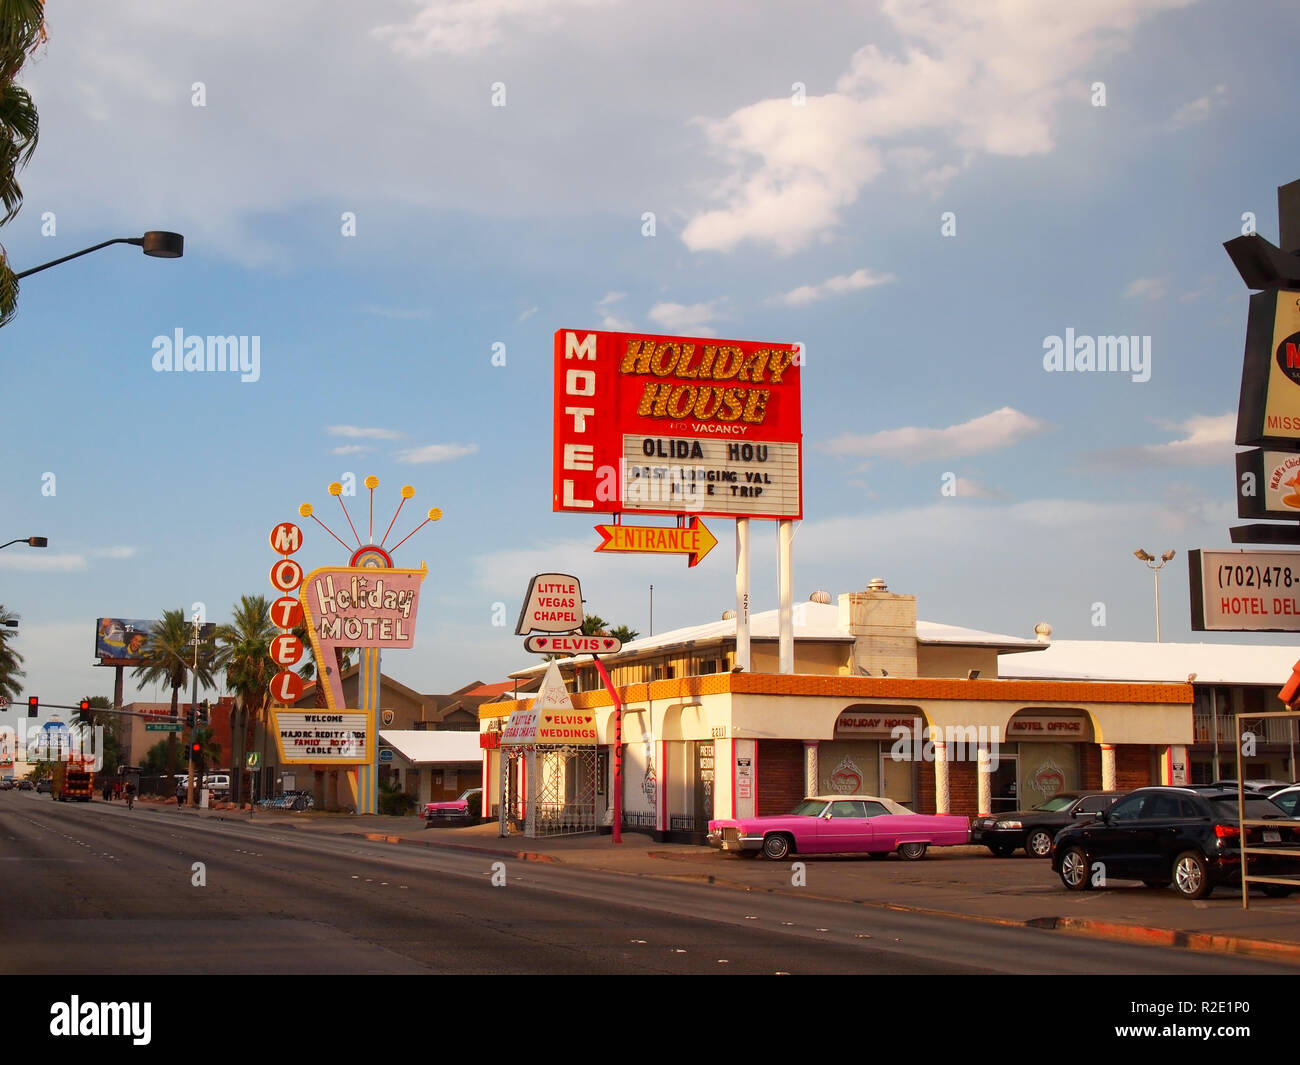 LAS VEGAS, NEVADA - JULY 20, 2018: The vintage Holiday House Motel and the Little Vegas Chapel, with its two pink Cadillacs, on Las Vegas Boulevard, o Stock Photo